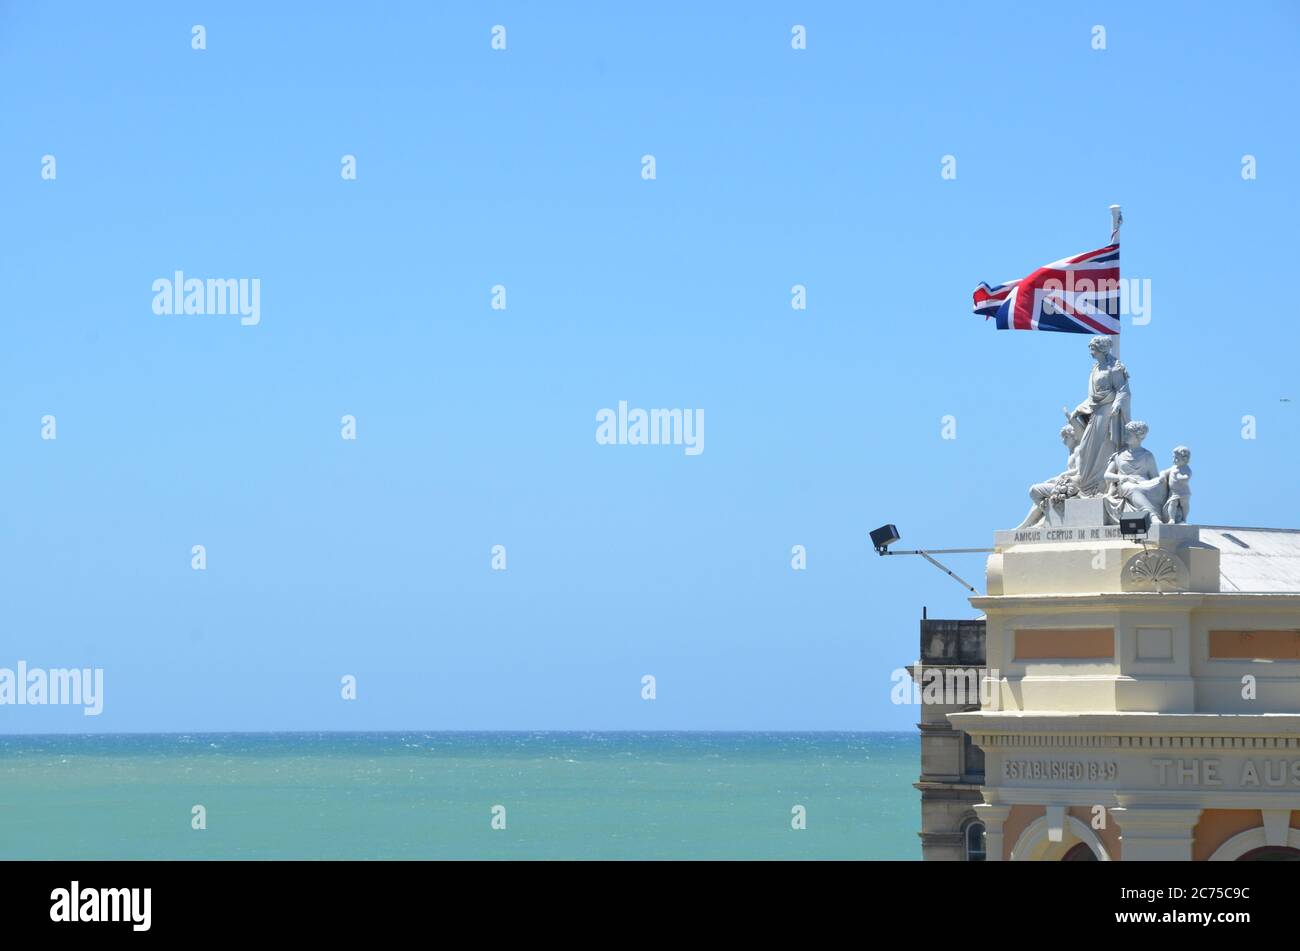 Roof Statues on Oamaru Stone Building with New Zealand flag at Oamaru. Stock Photo